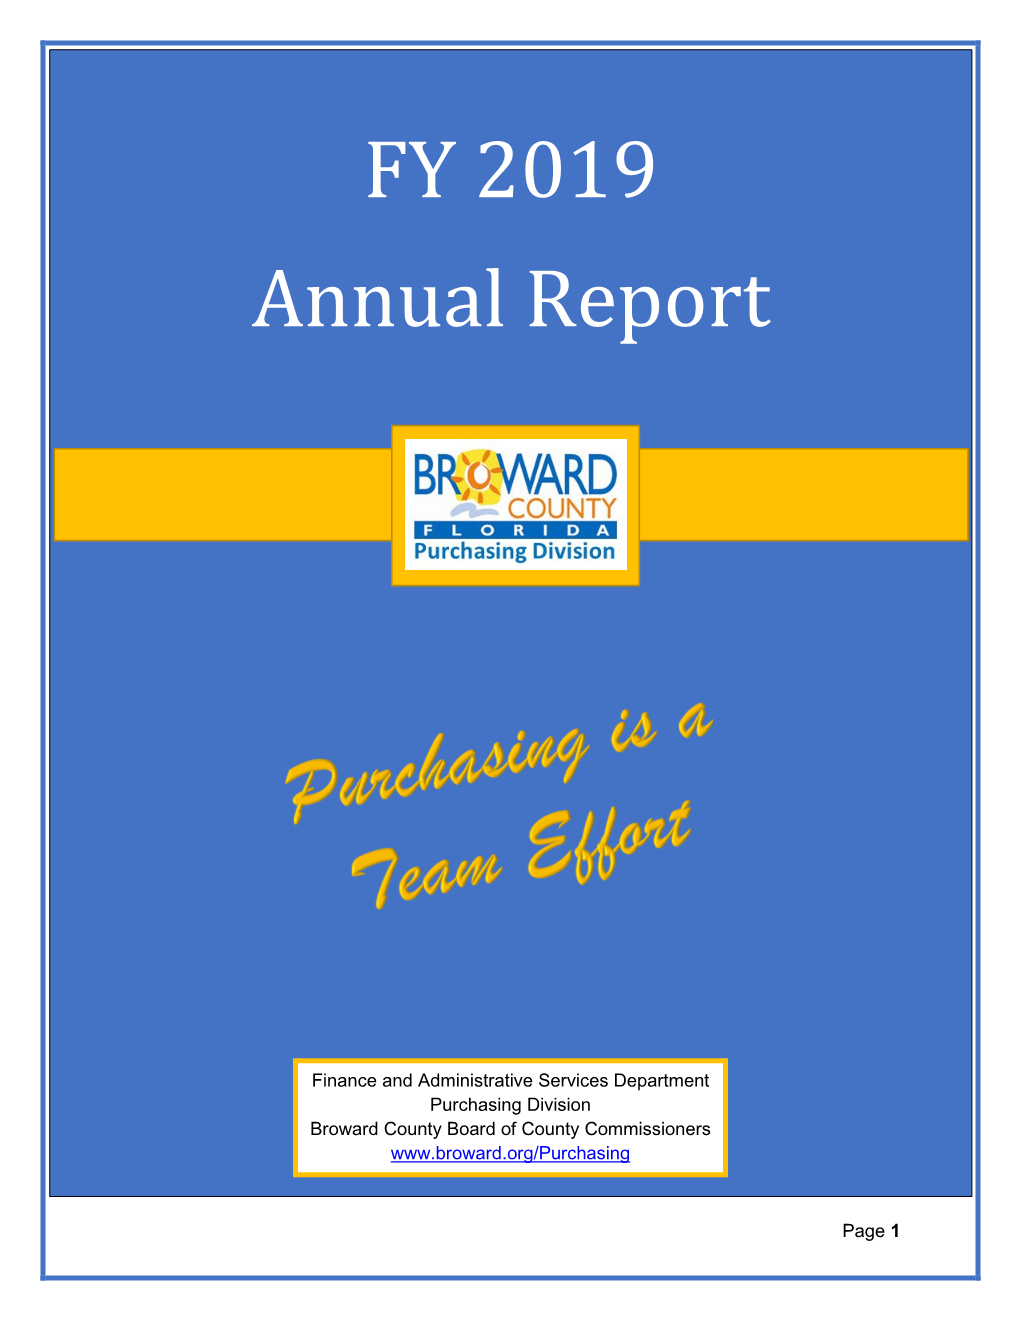 Purchasing Annual Report FY 19